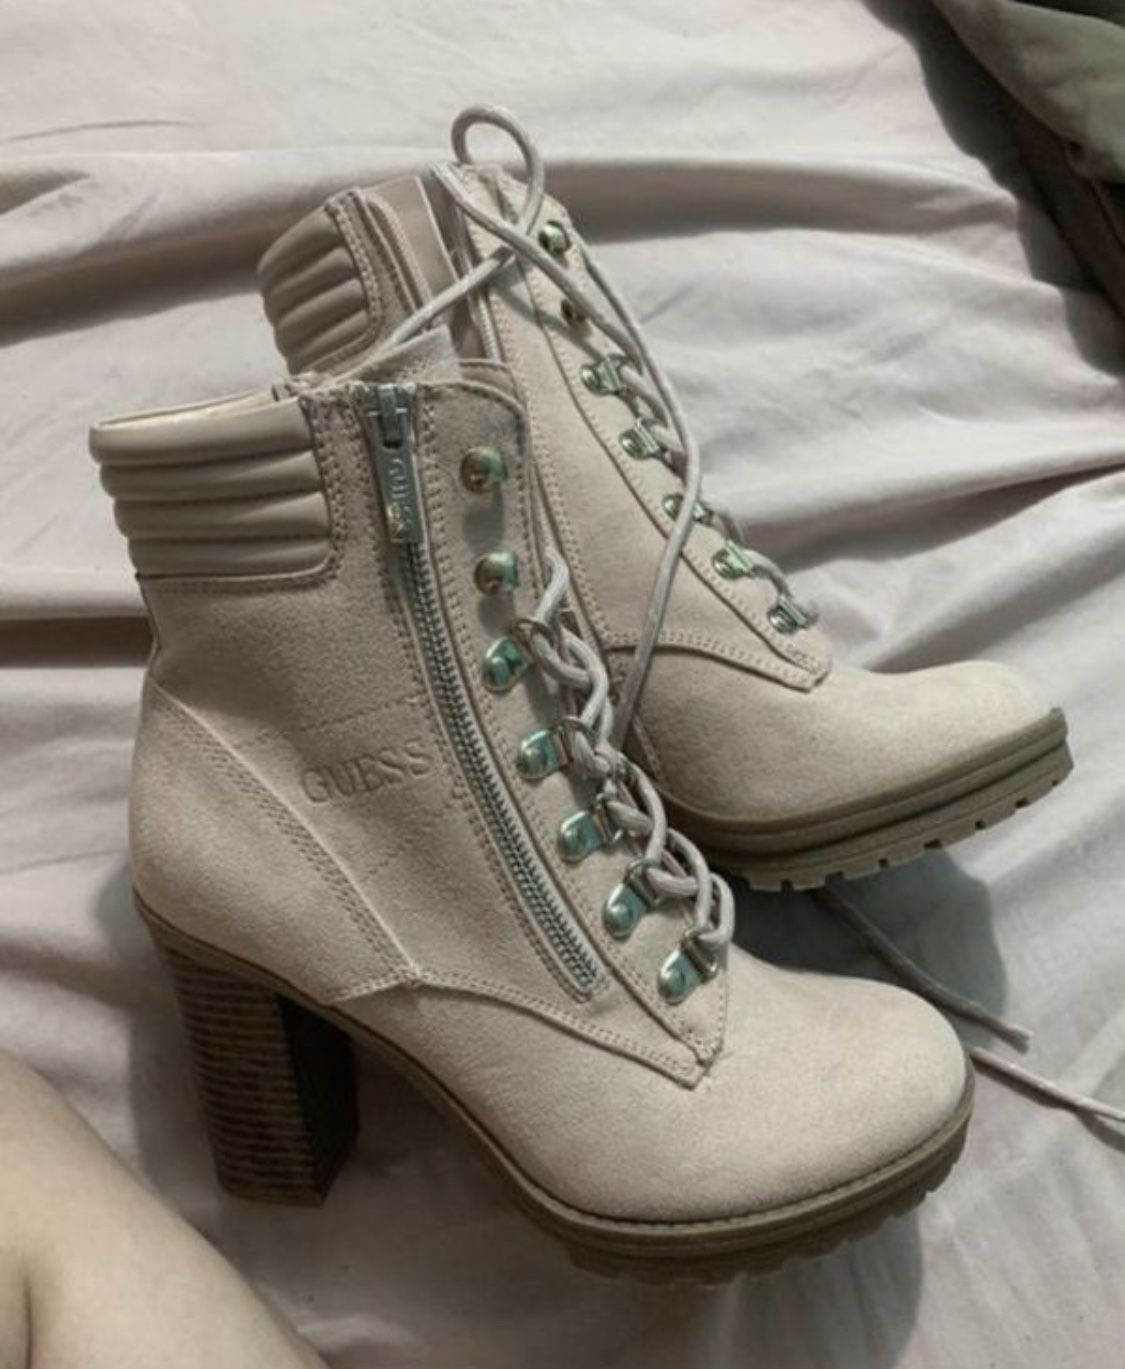 Guess boots #6 for women (para mujer)❤️